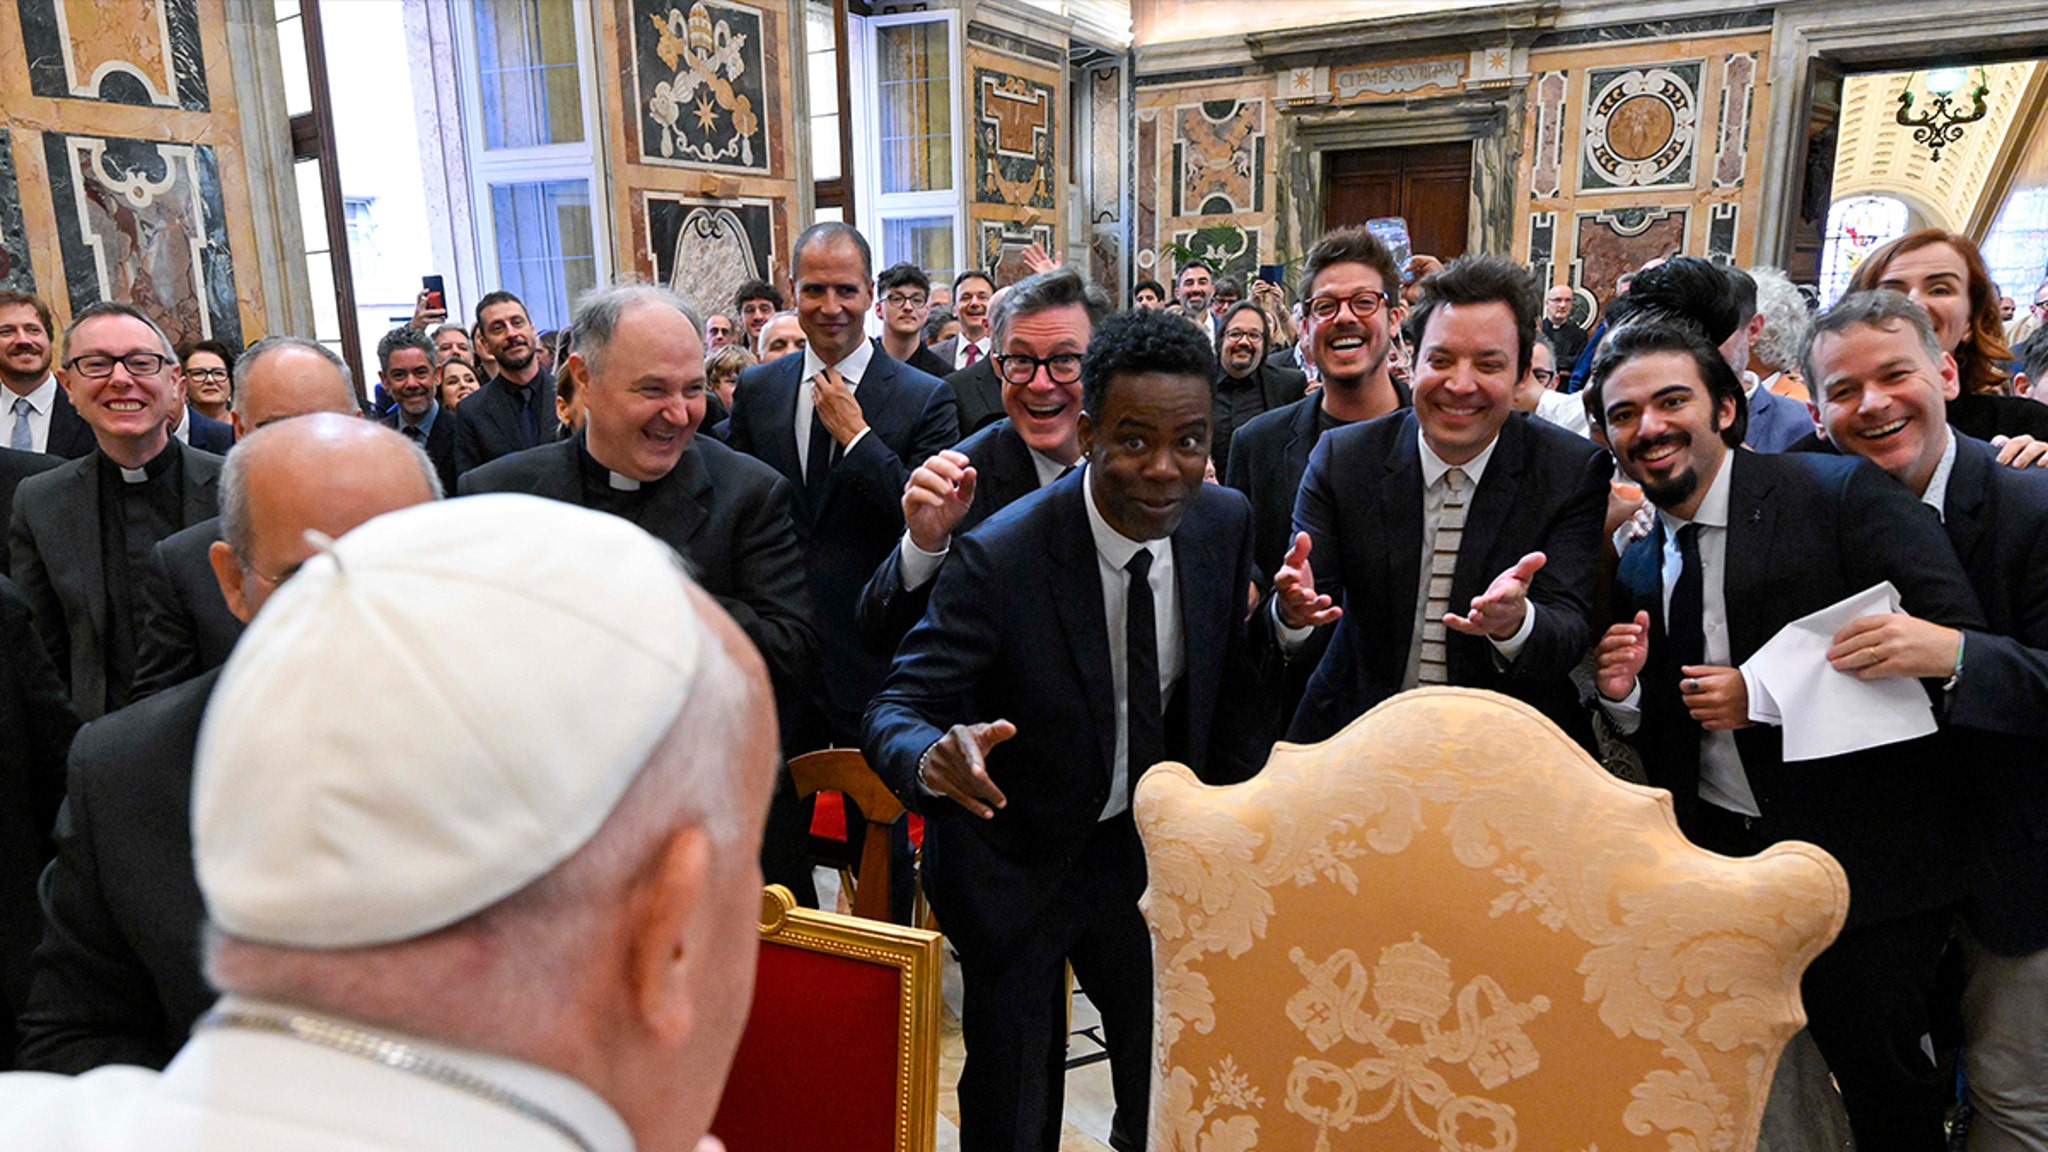 pope-francis-meets-with-hollywood's-biggest-comedians-at-vatican